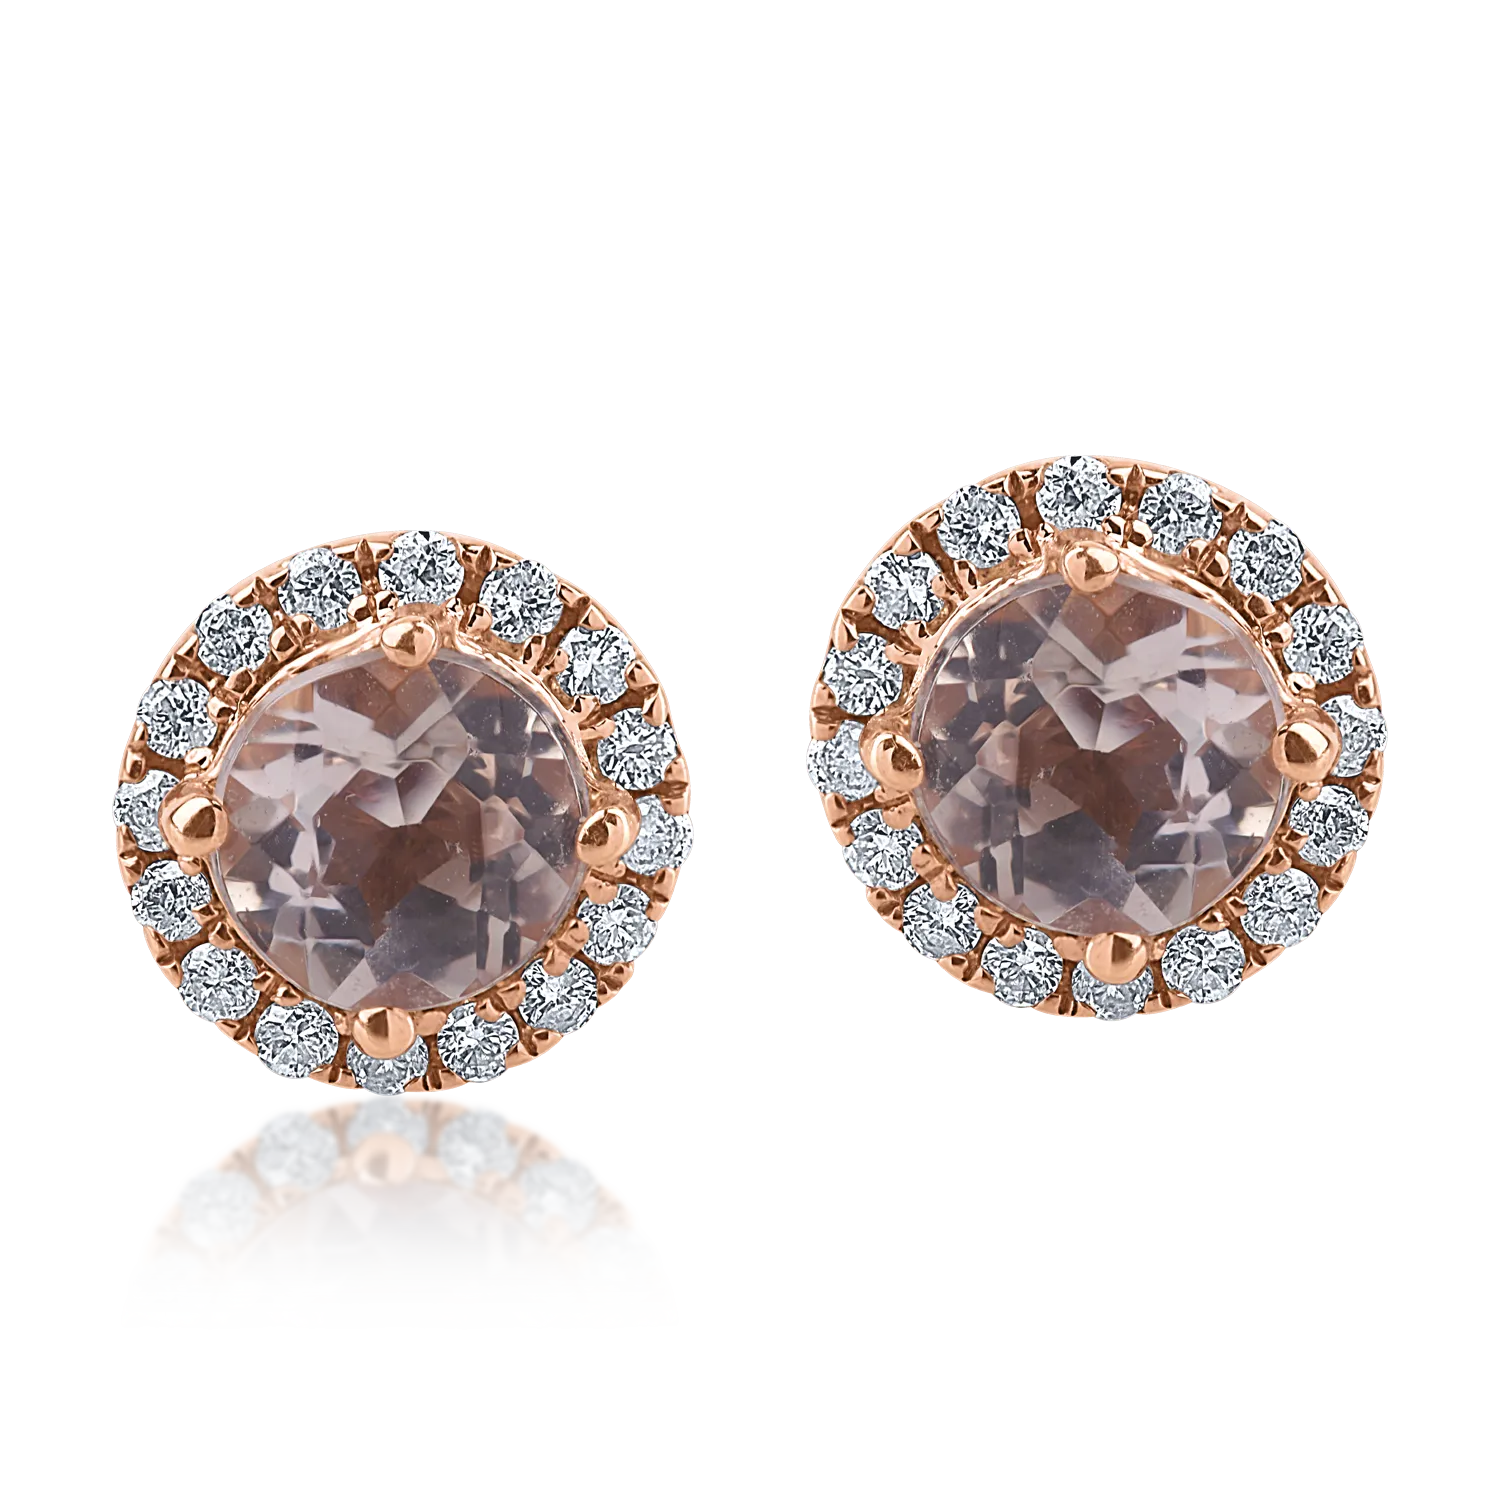 Rose gold earrings with 0.8ct morganites and 0.19ct diamonds